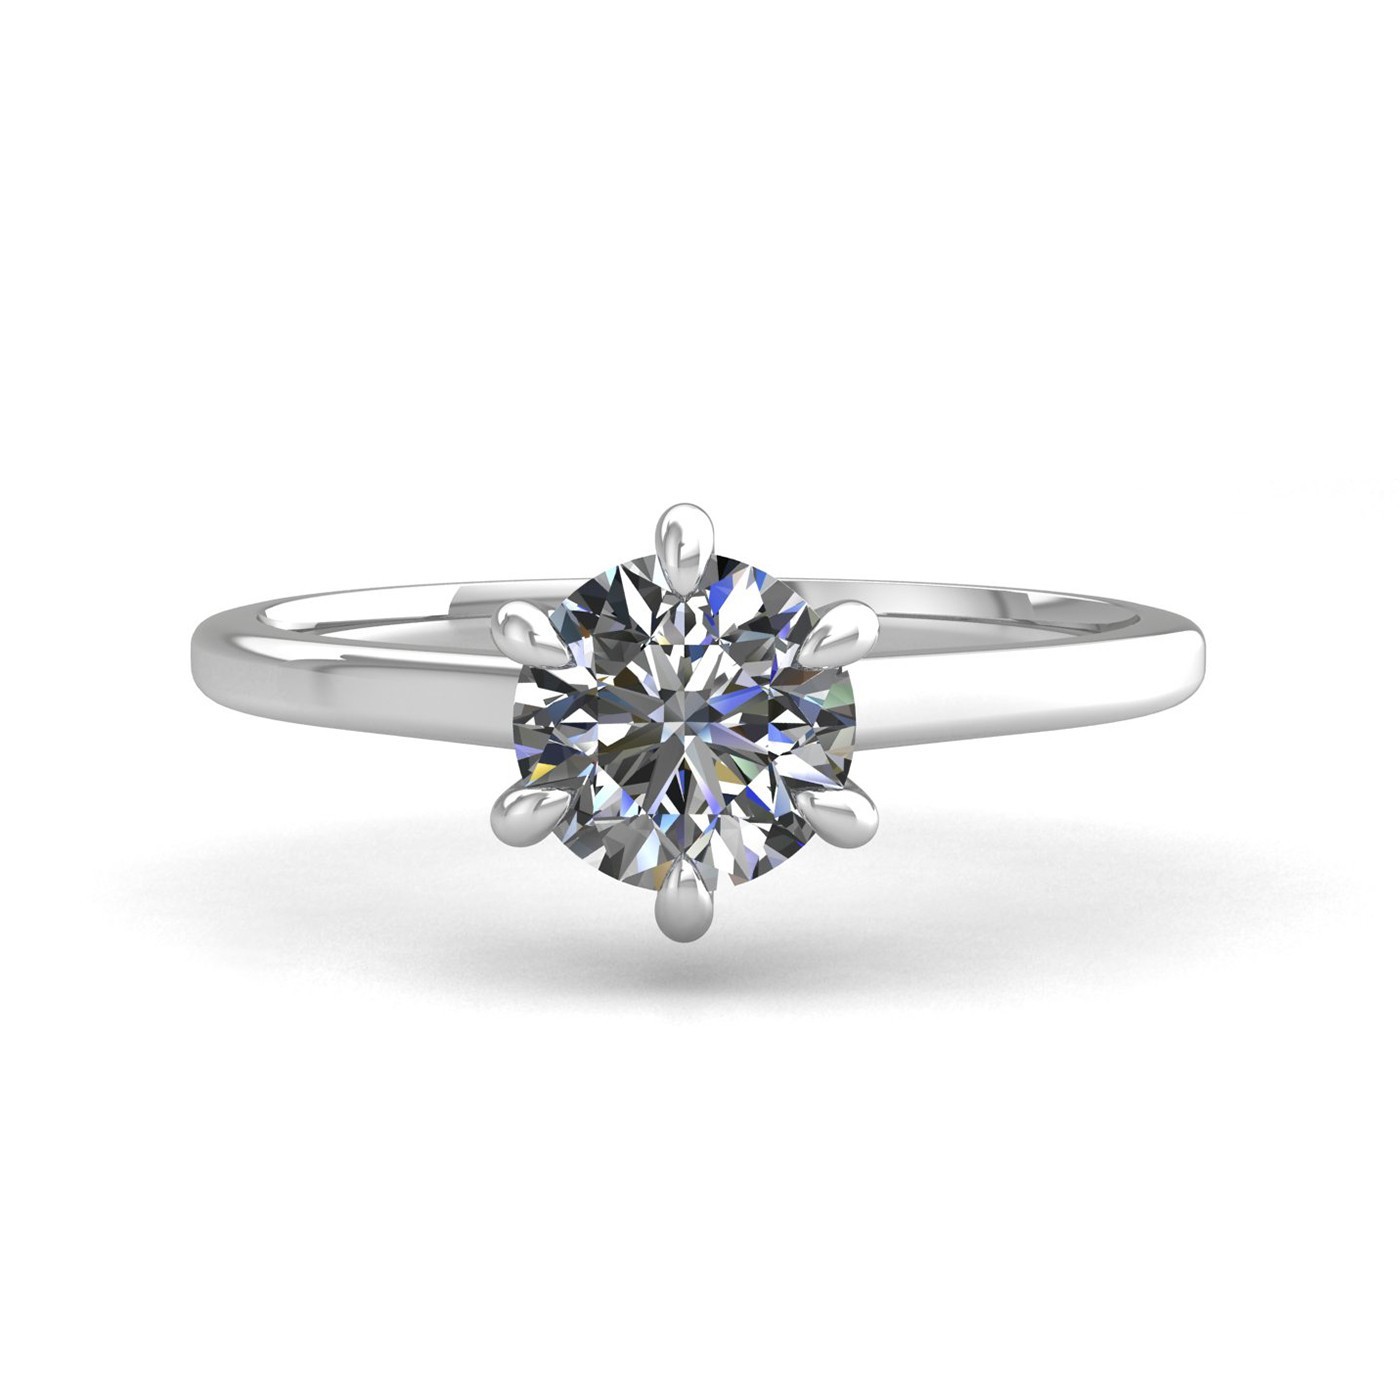 18k white gold  2,00 ct 6 prongs solitaire round cut diamond engagement ring with whisper thin band Photos & images